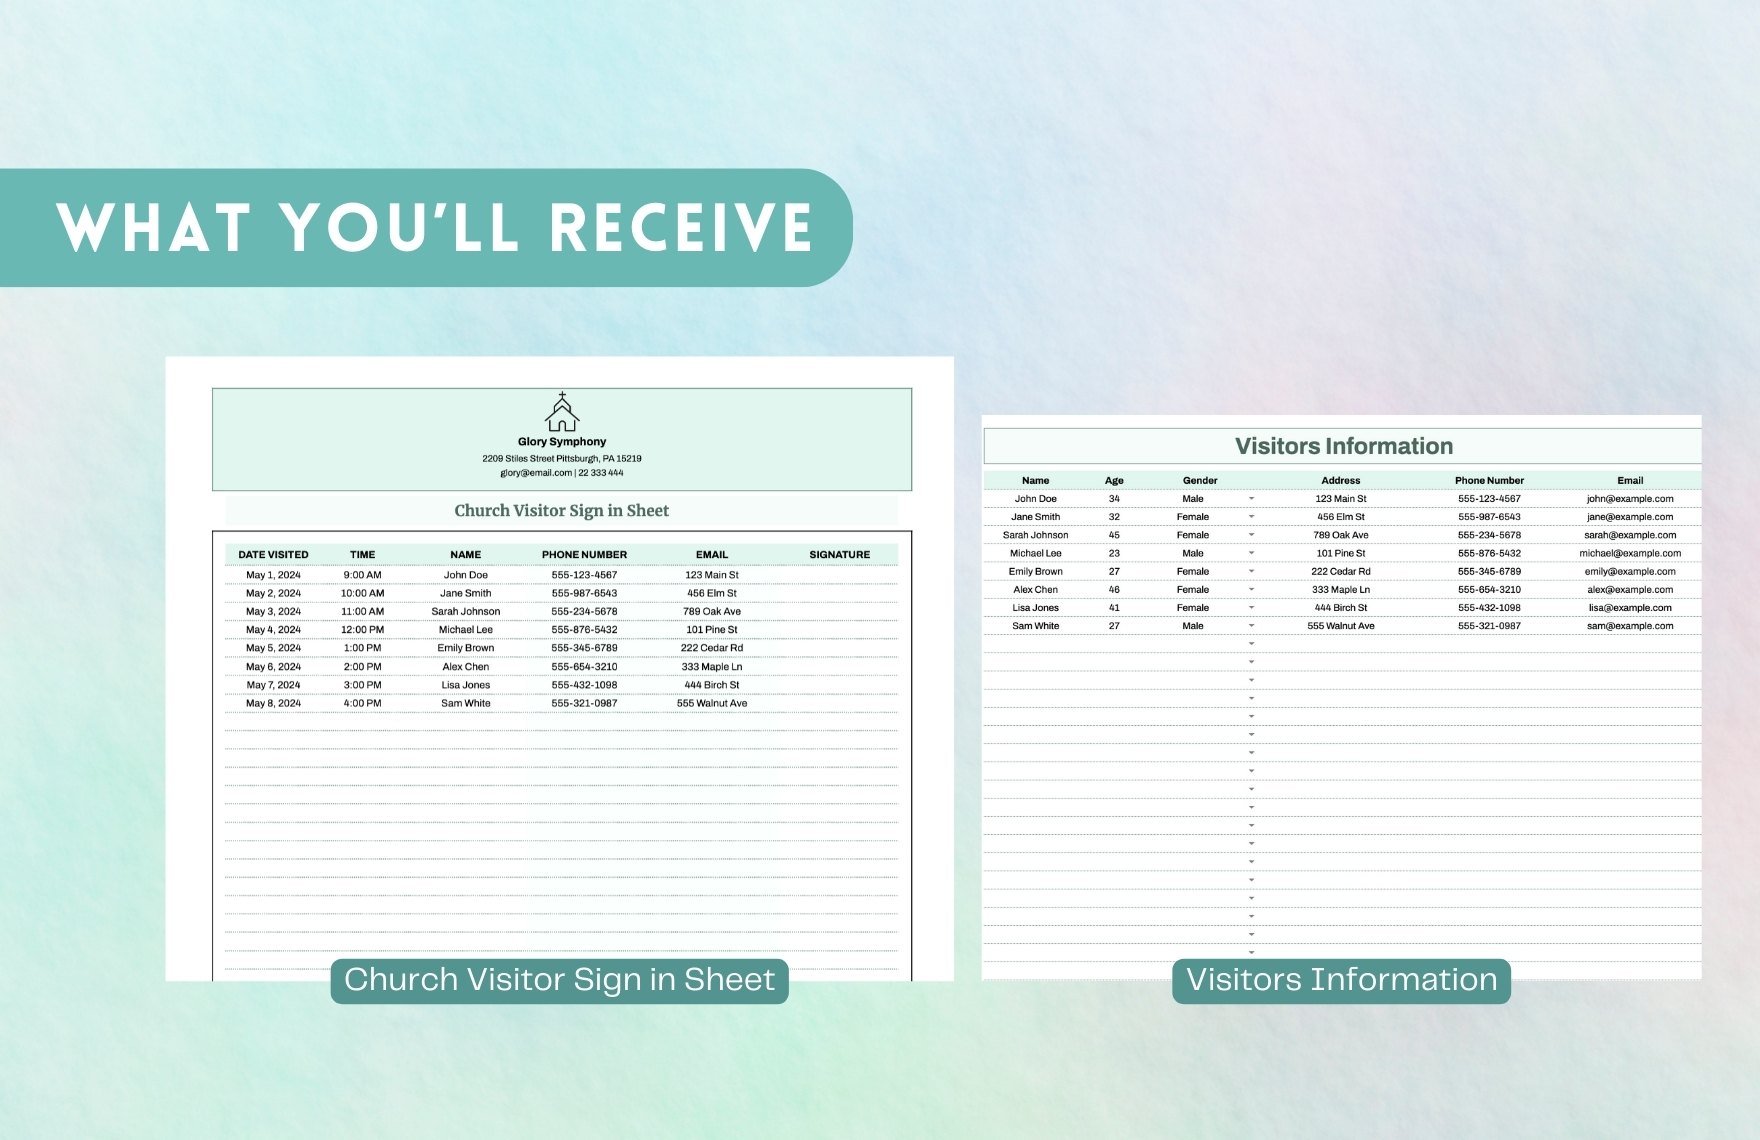 Church Visitor Sign in Sheet Template